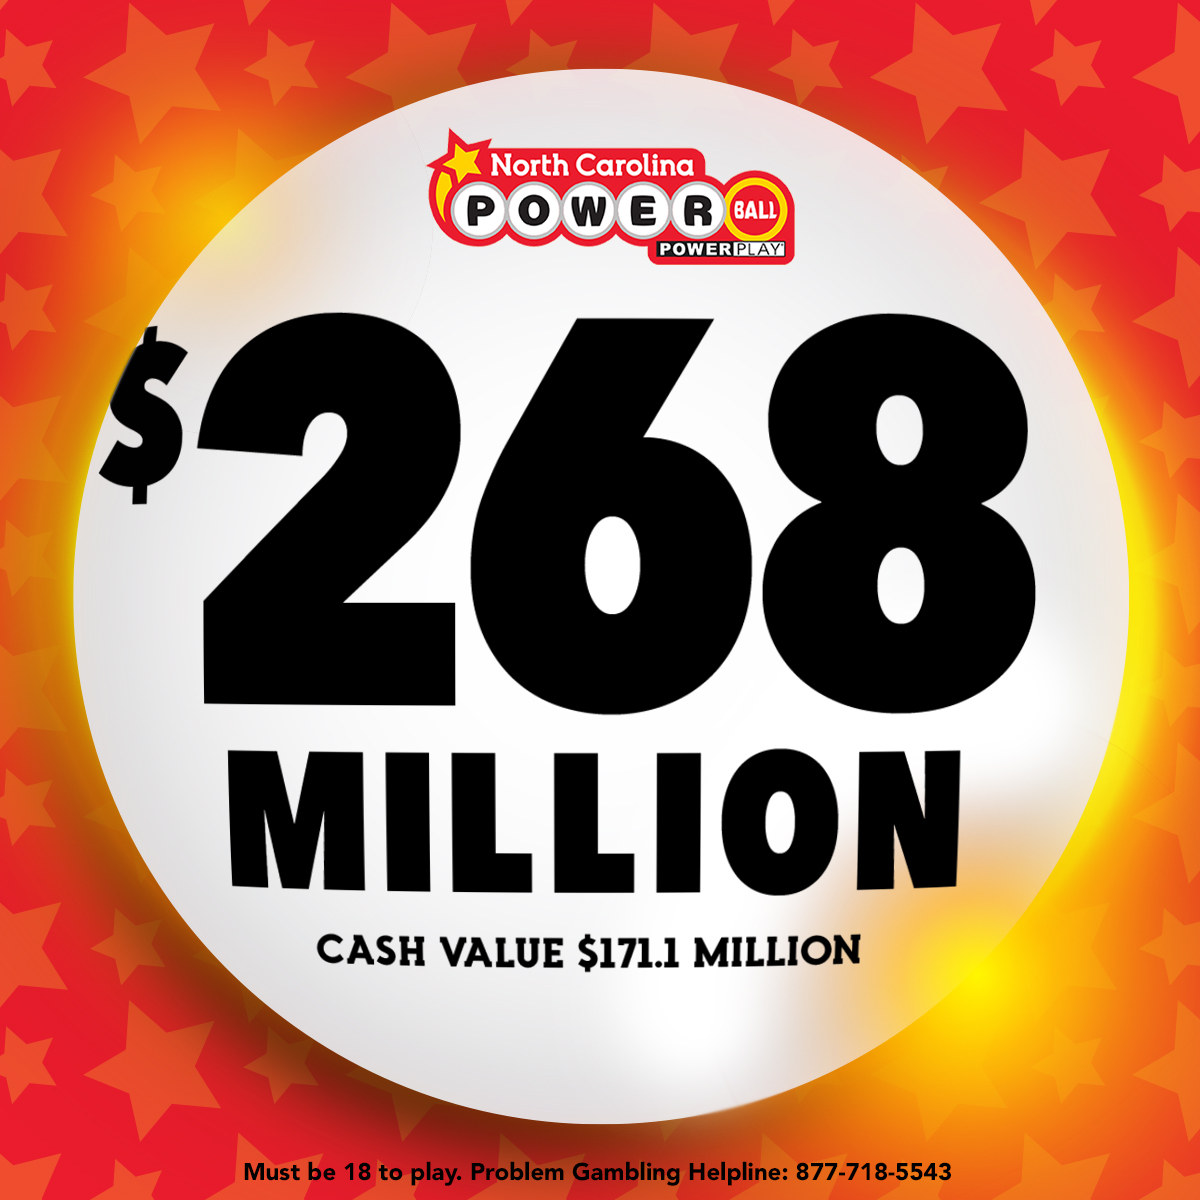 The jackpot for tonight's #Powerball drawing has risen to $268 million, or $171.1 million in cash! How do you pick your Powerball numbers? #NCLottery https://t.co/ygflREkDmO https://t.co/thvHpWVOpV